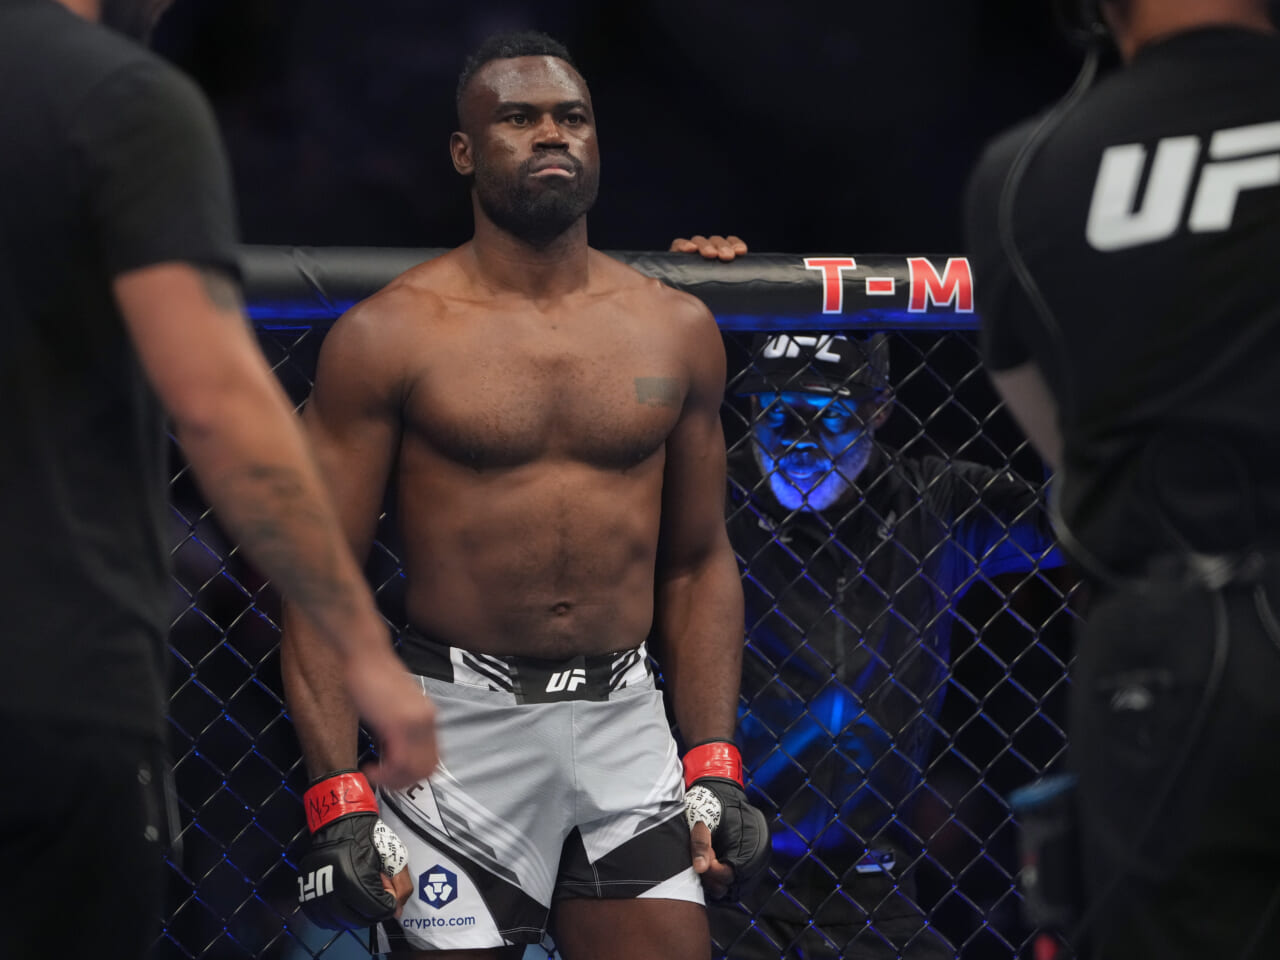 UFC news: Uriah Hall retires from MMA